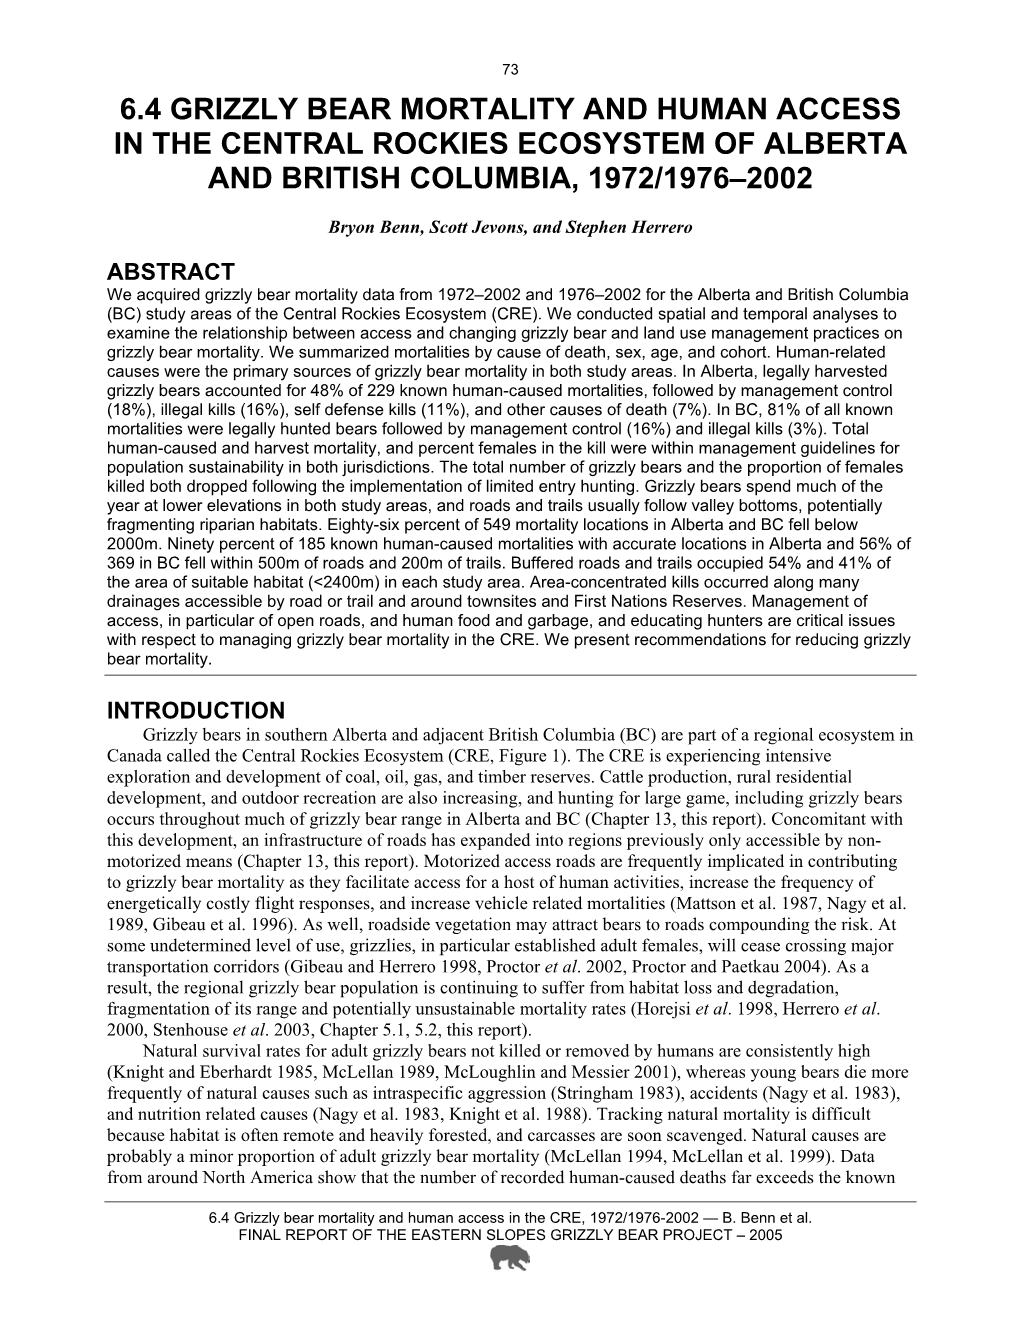 6.4 Grizzly Bear Mortality and Human Access in the Central Rockies Ecosystem of Alberta and British Columbia, 1972/1976–2002